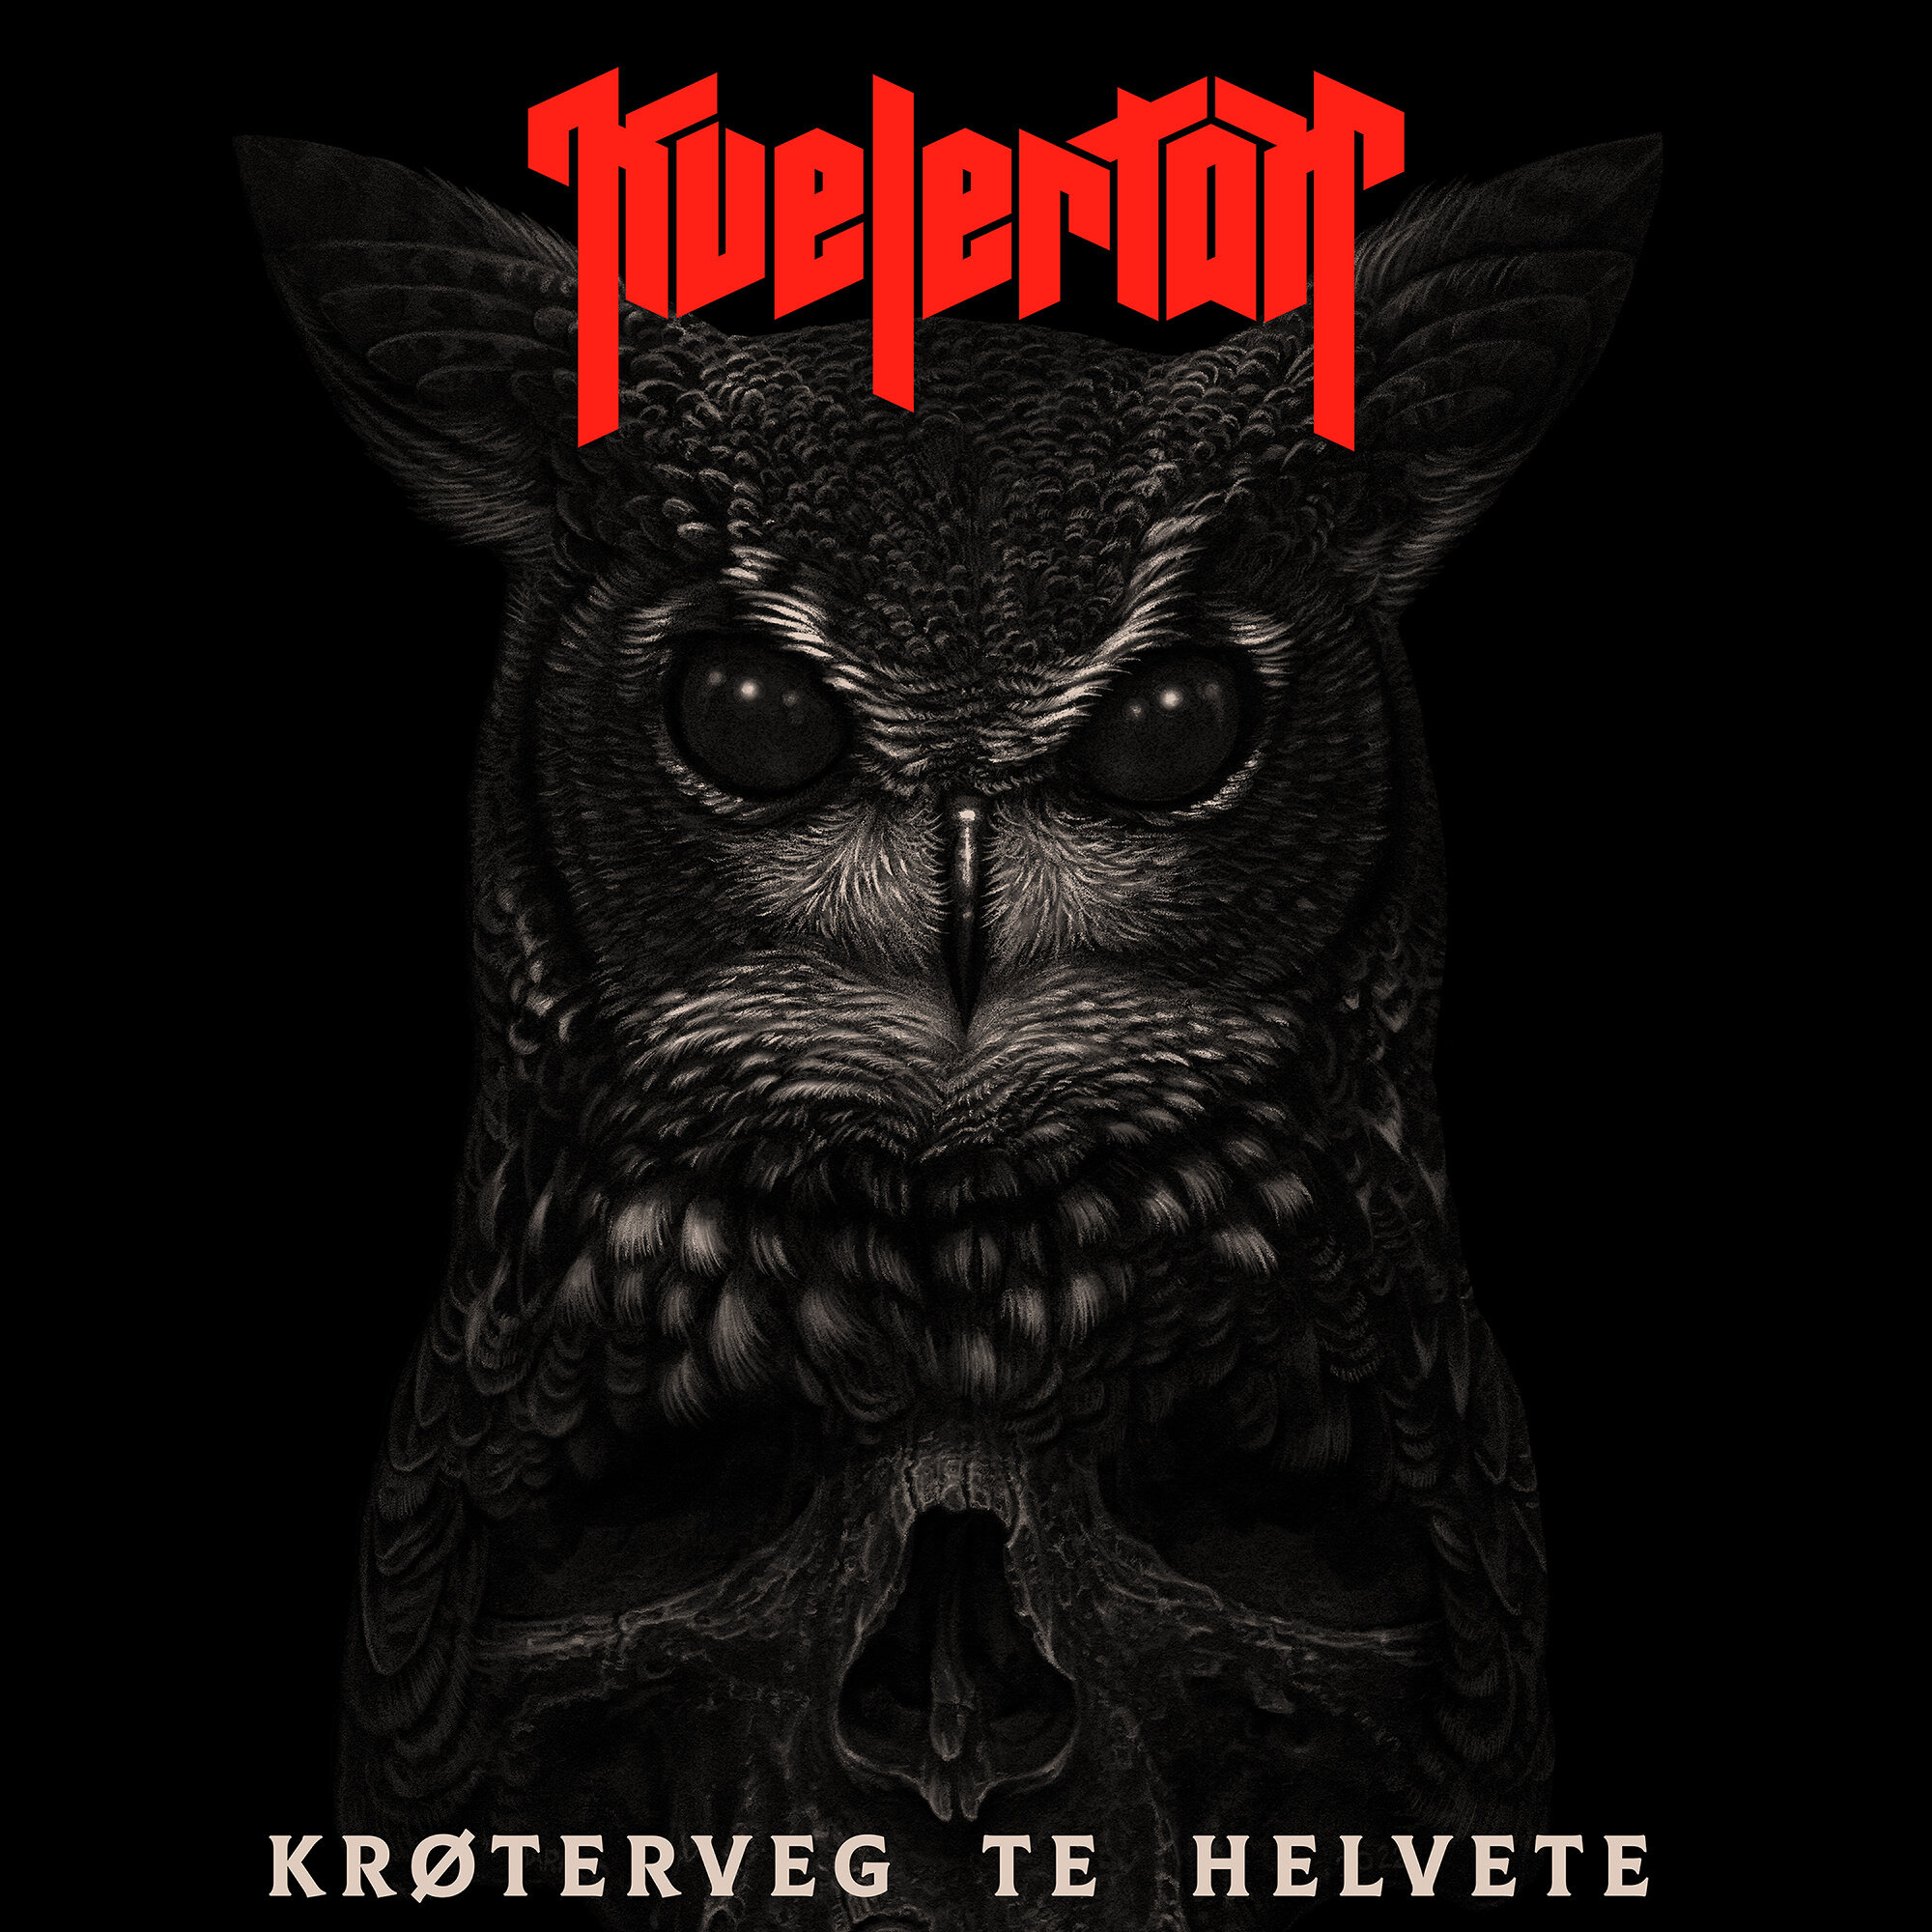 ⚡ Only one more day until &ldquo;Kr&oslash;terveg Te Helvete&rdquo; is out! ⚡ We are so excited!
Have you pre-saved it yet? Check out the pre-save link in our bio. 🔥

#Kvelertak #Kr&oslash;tervegTeHelvete #RiseRecords #PetroleumRecords